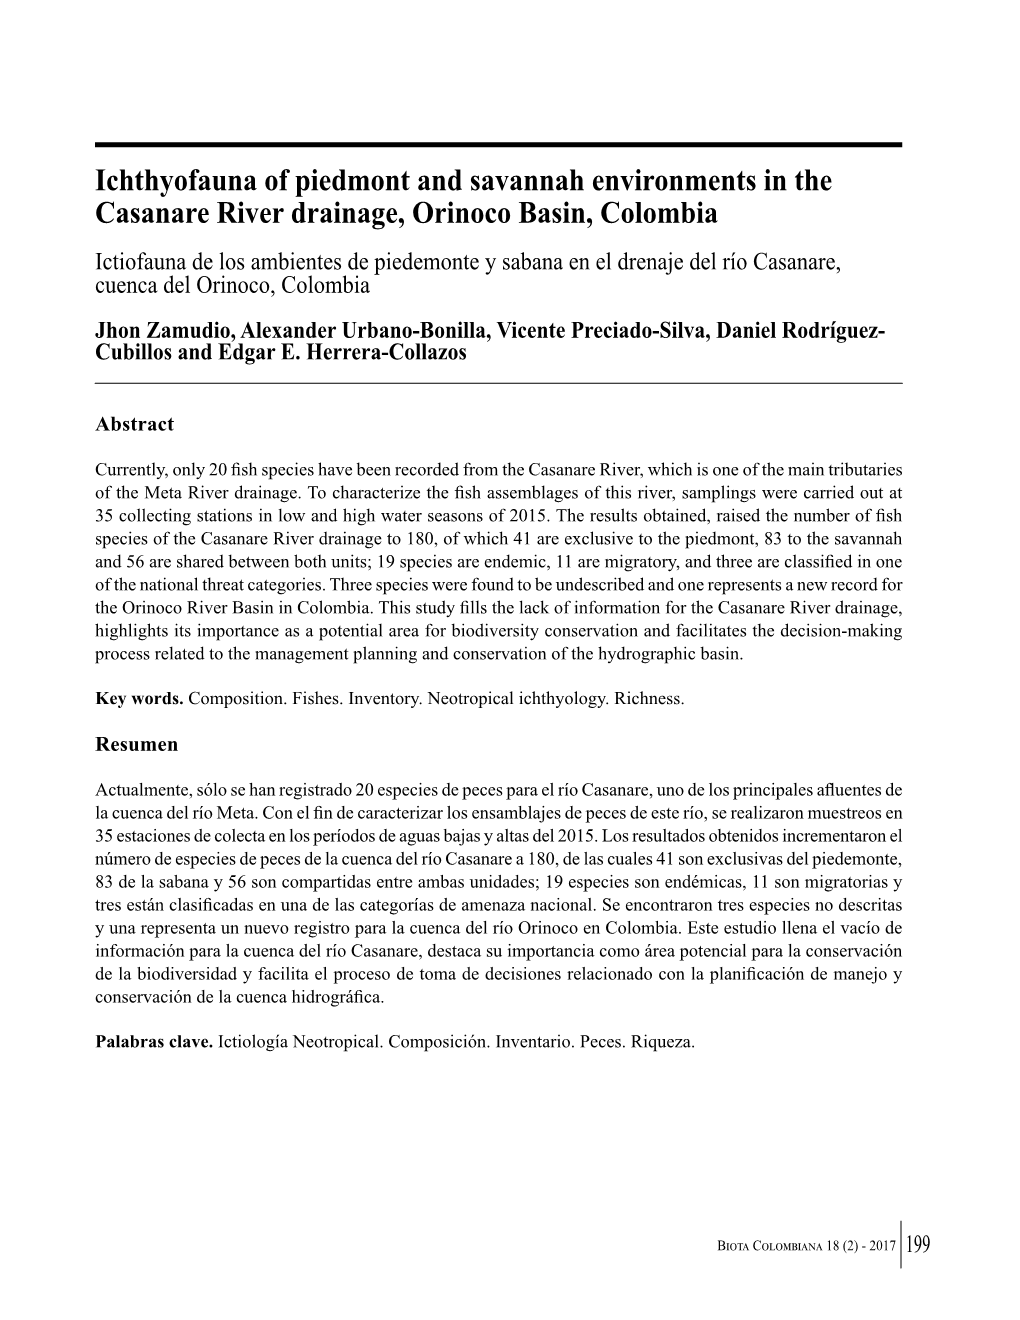 Ichthyofauna of Piedmont and Savannah Environments in the Casanare River Drainage, Orinoco Basin, Colombia